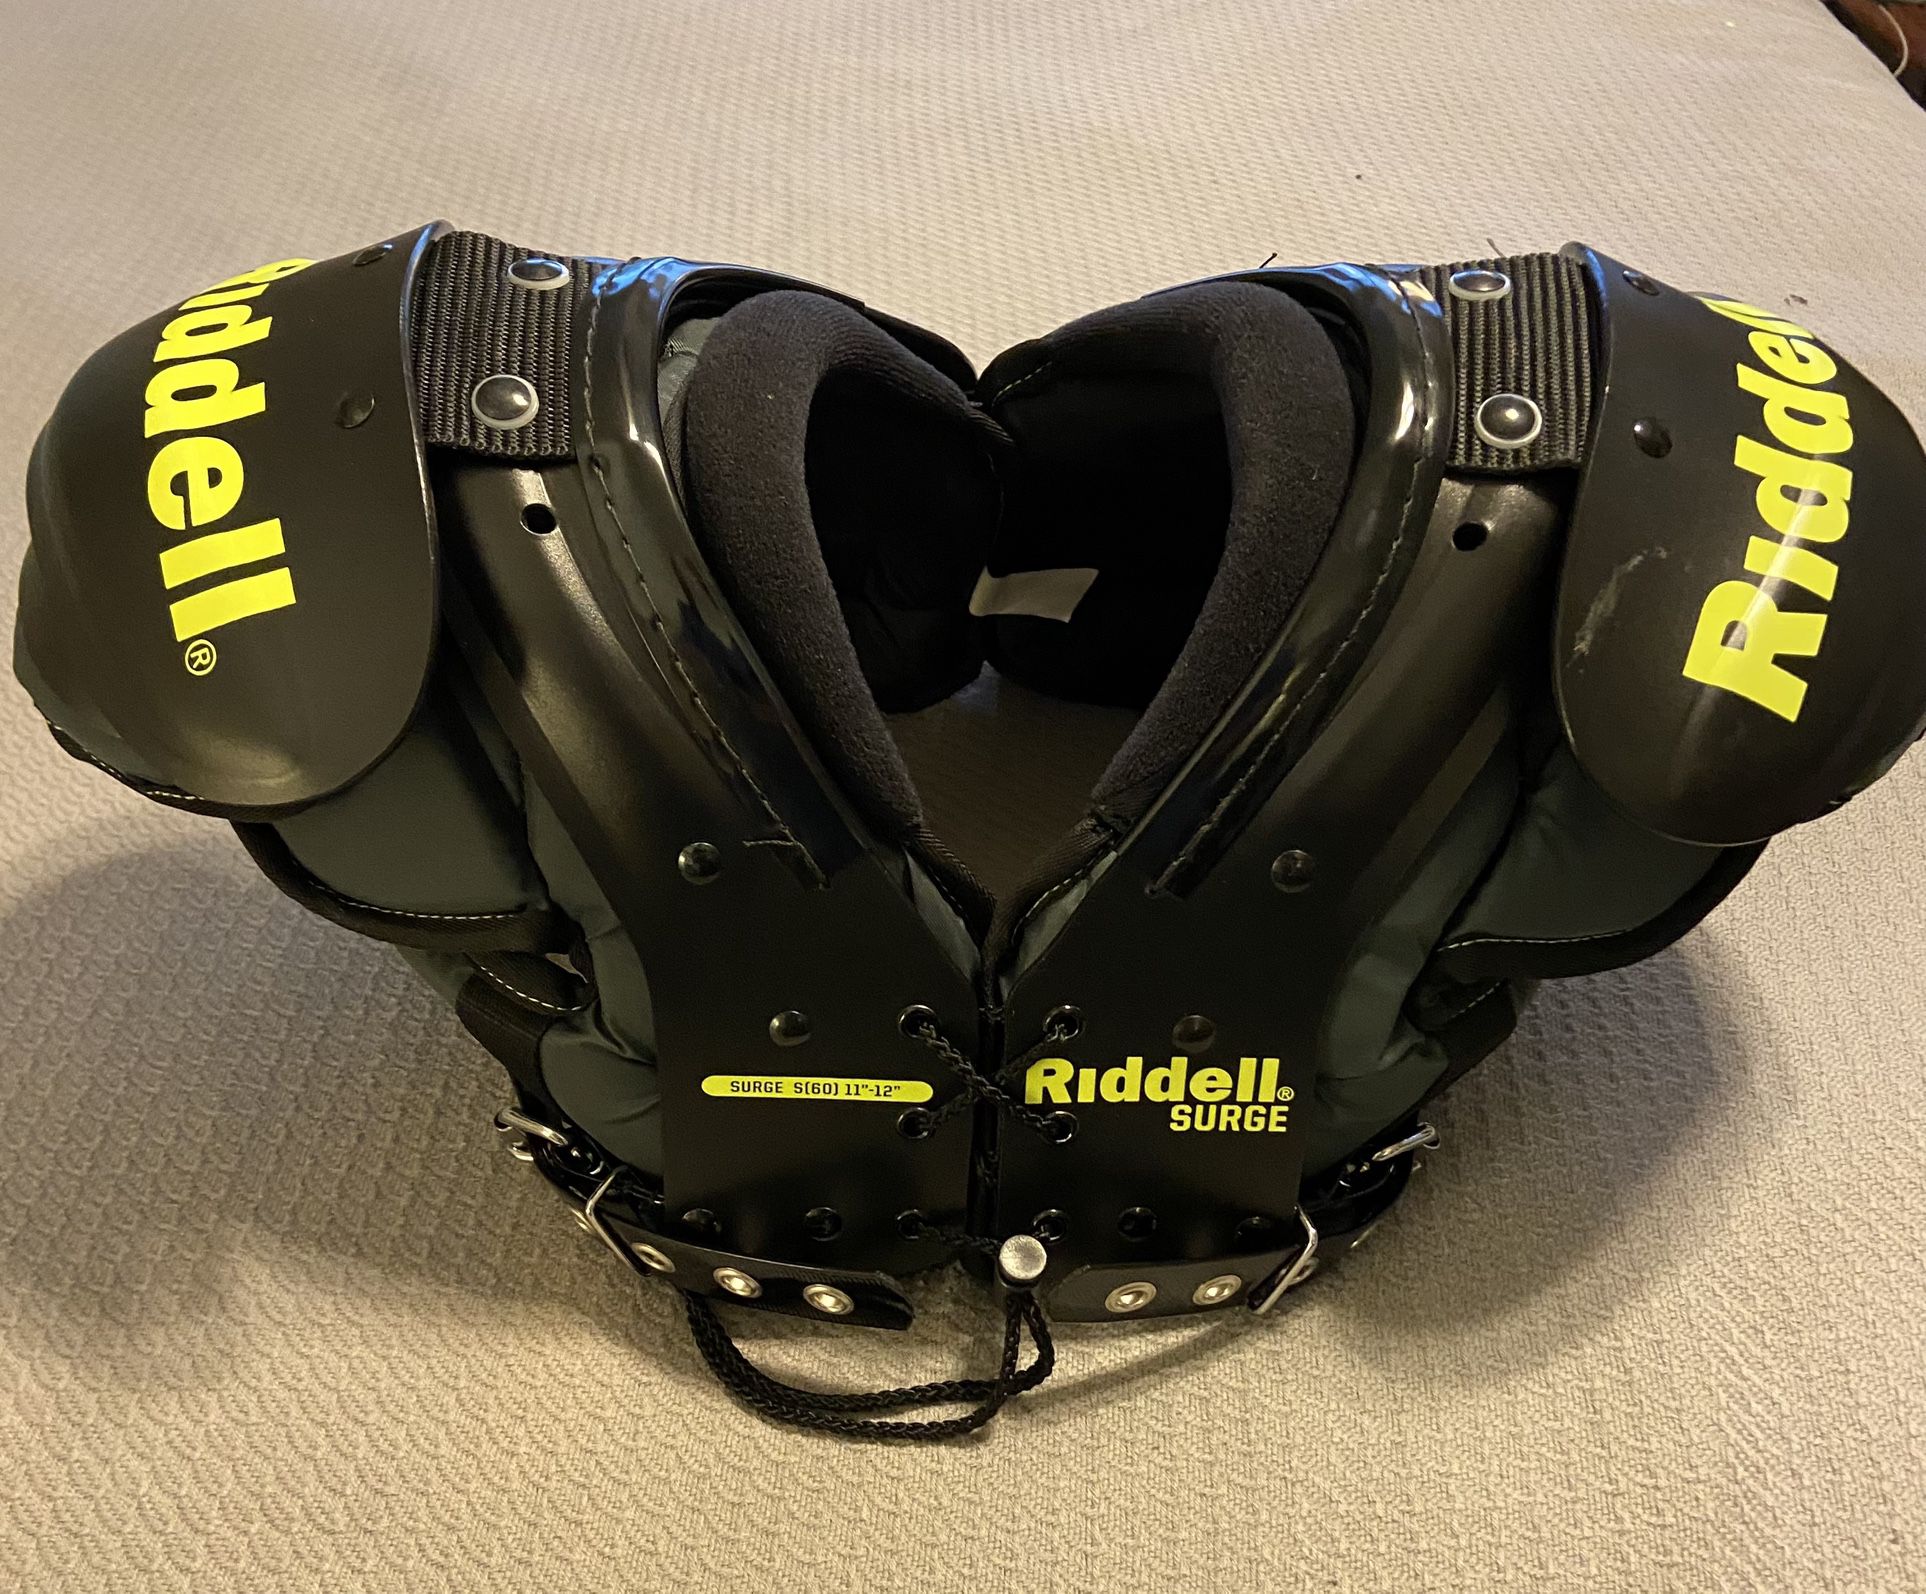 Riddell Surge Youth Shoulder Pad w/Backplate, Black/Neon Green, Size: XL